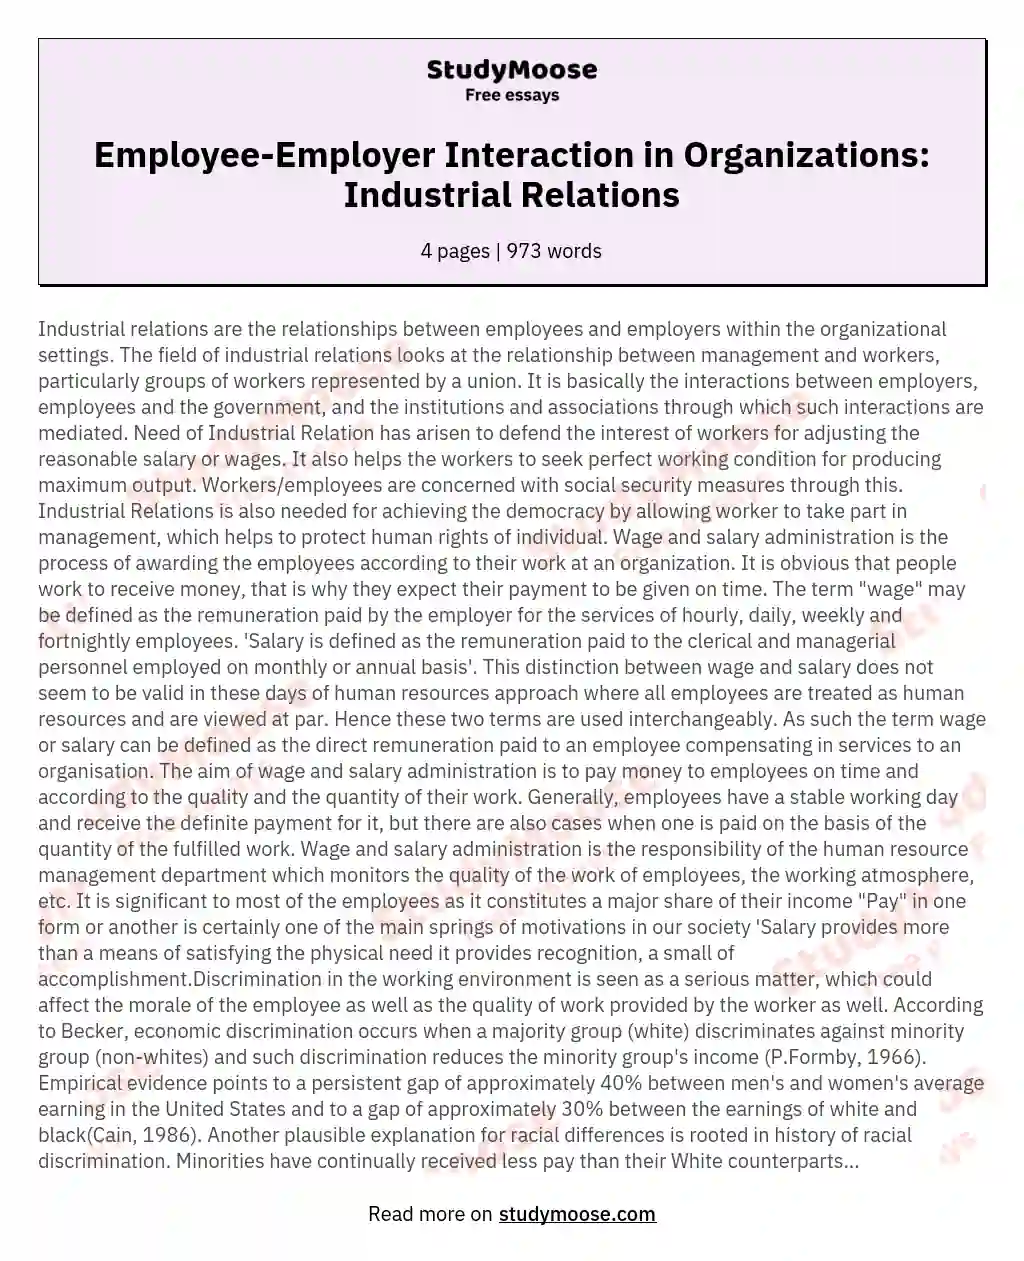 Industrial relations are the relationships between employees and employers within the organizational